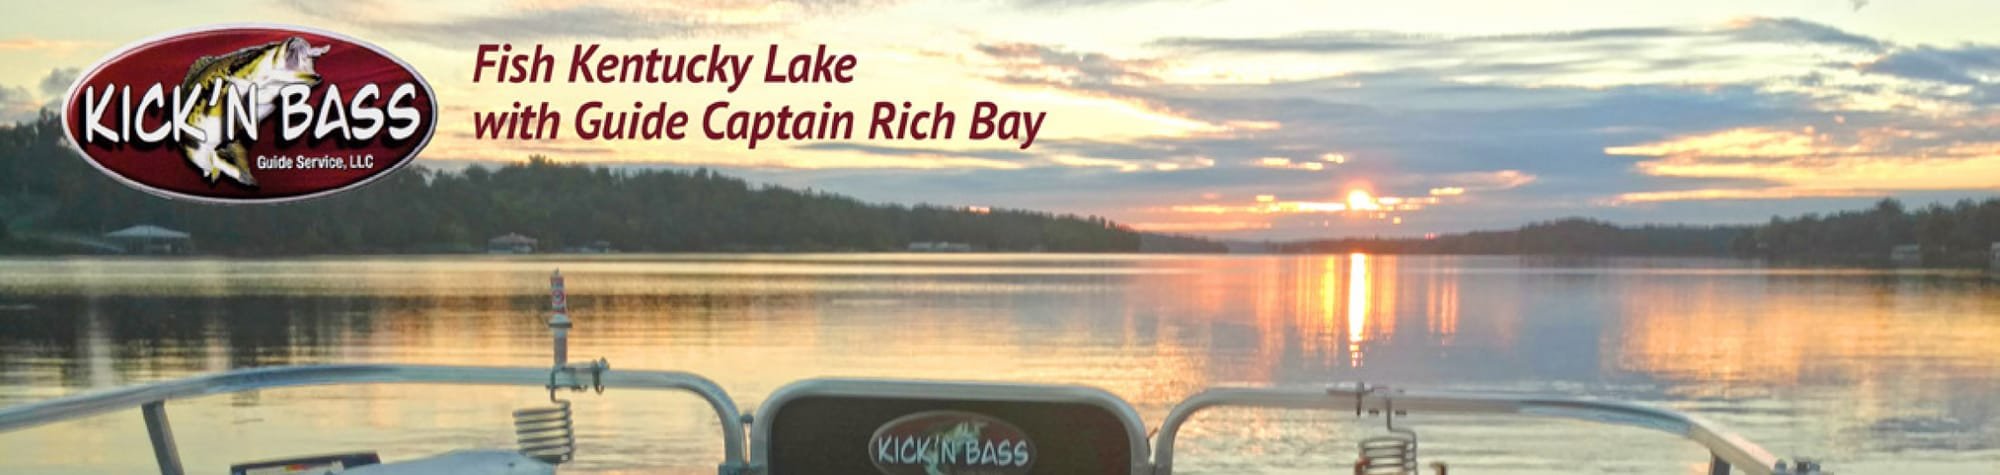 Your Kick'n Bass Fishing Report for August 24, 2018